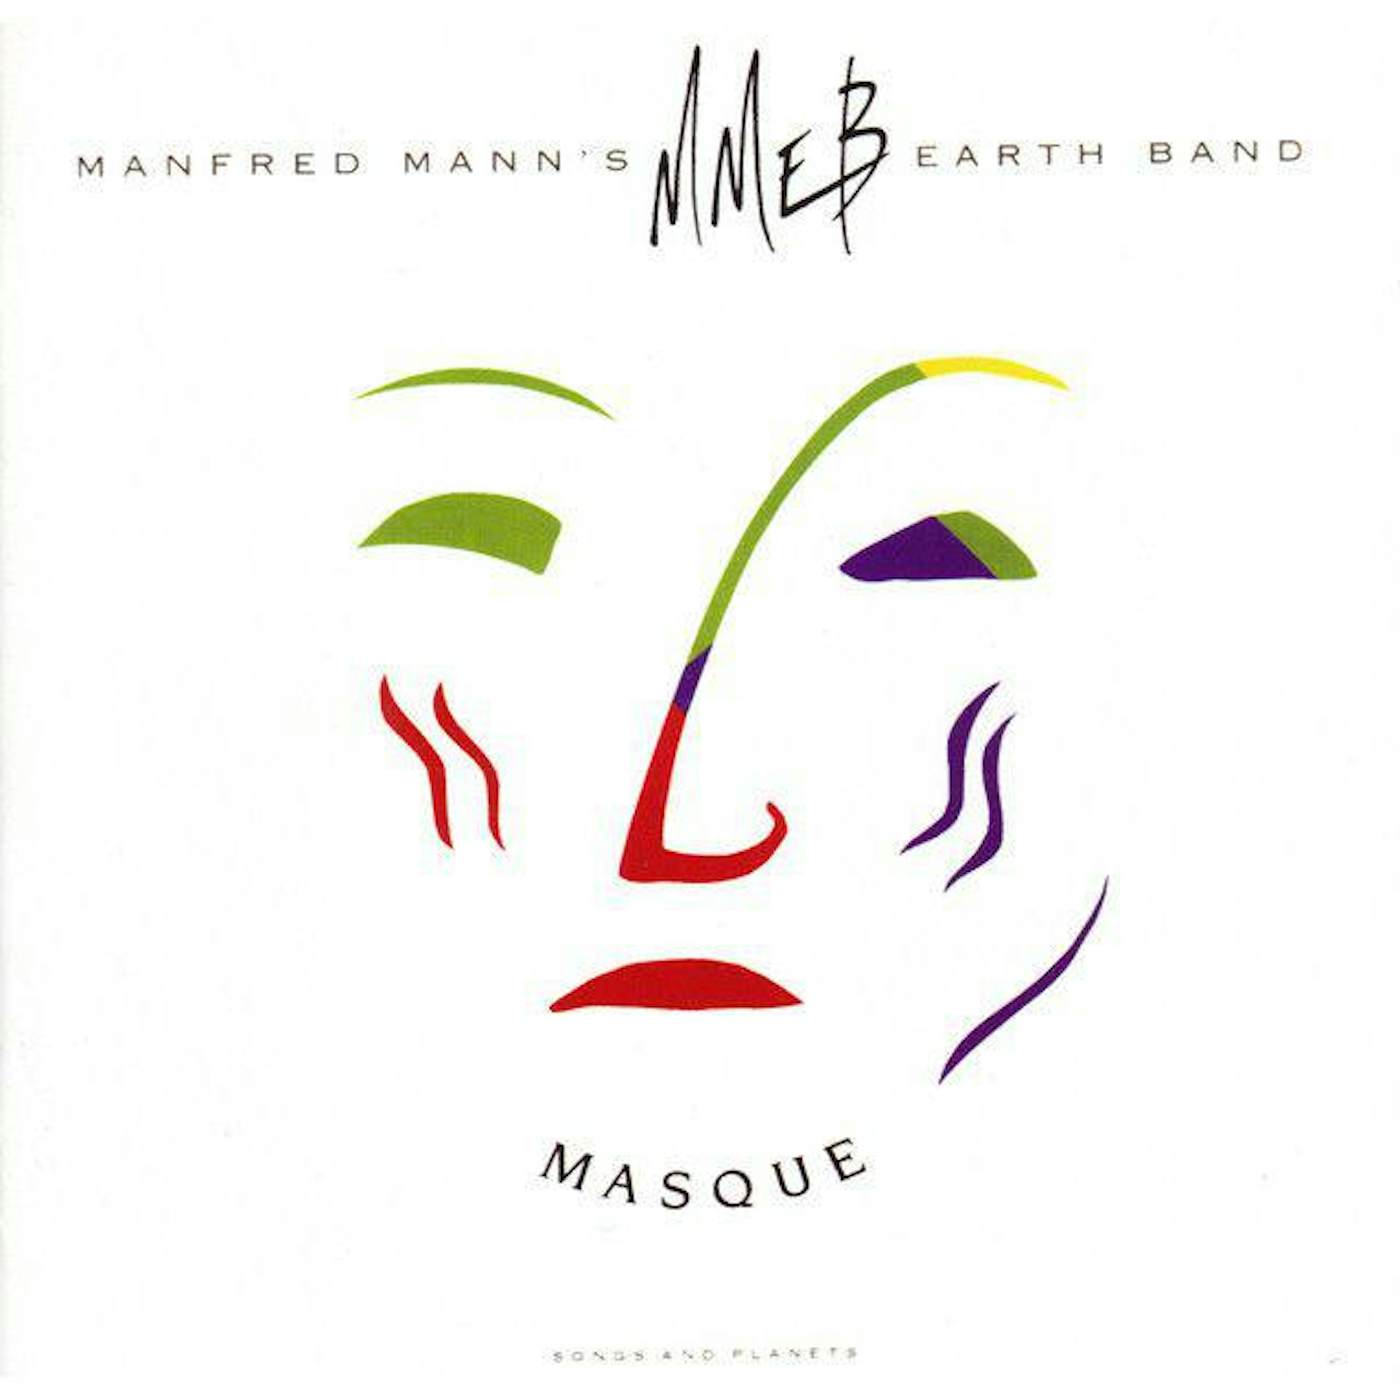 Manfred Mann's Earth Band Masque Vinyl Record